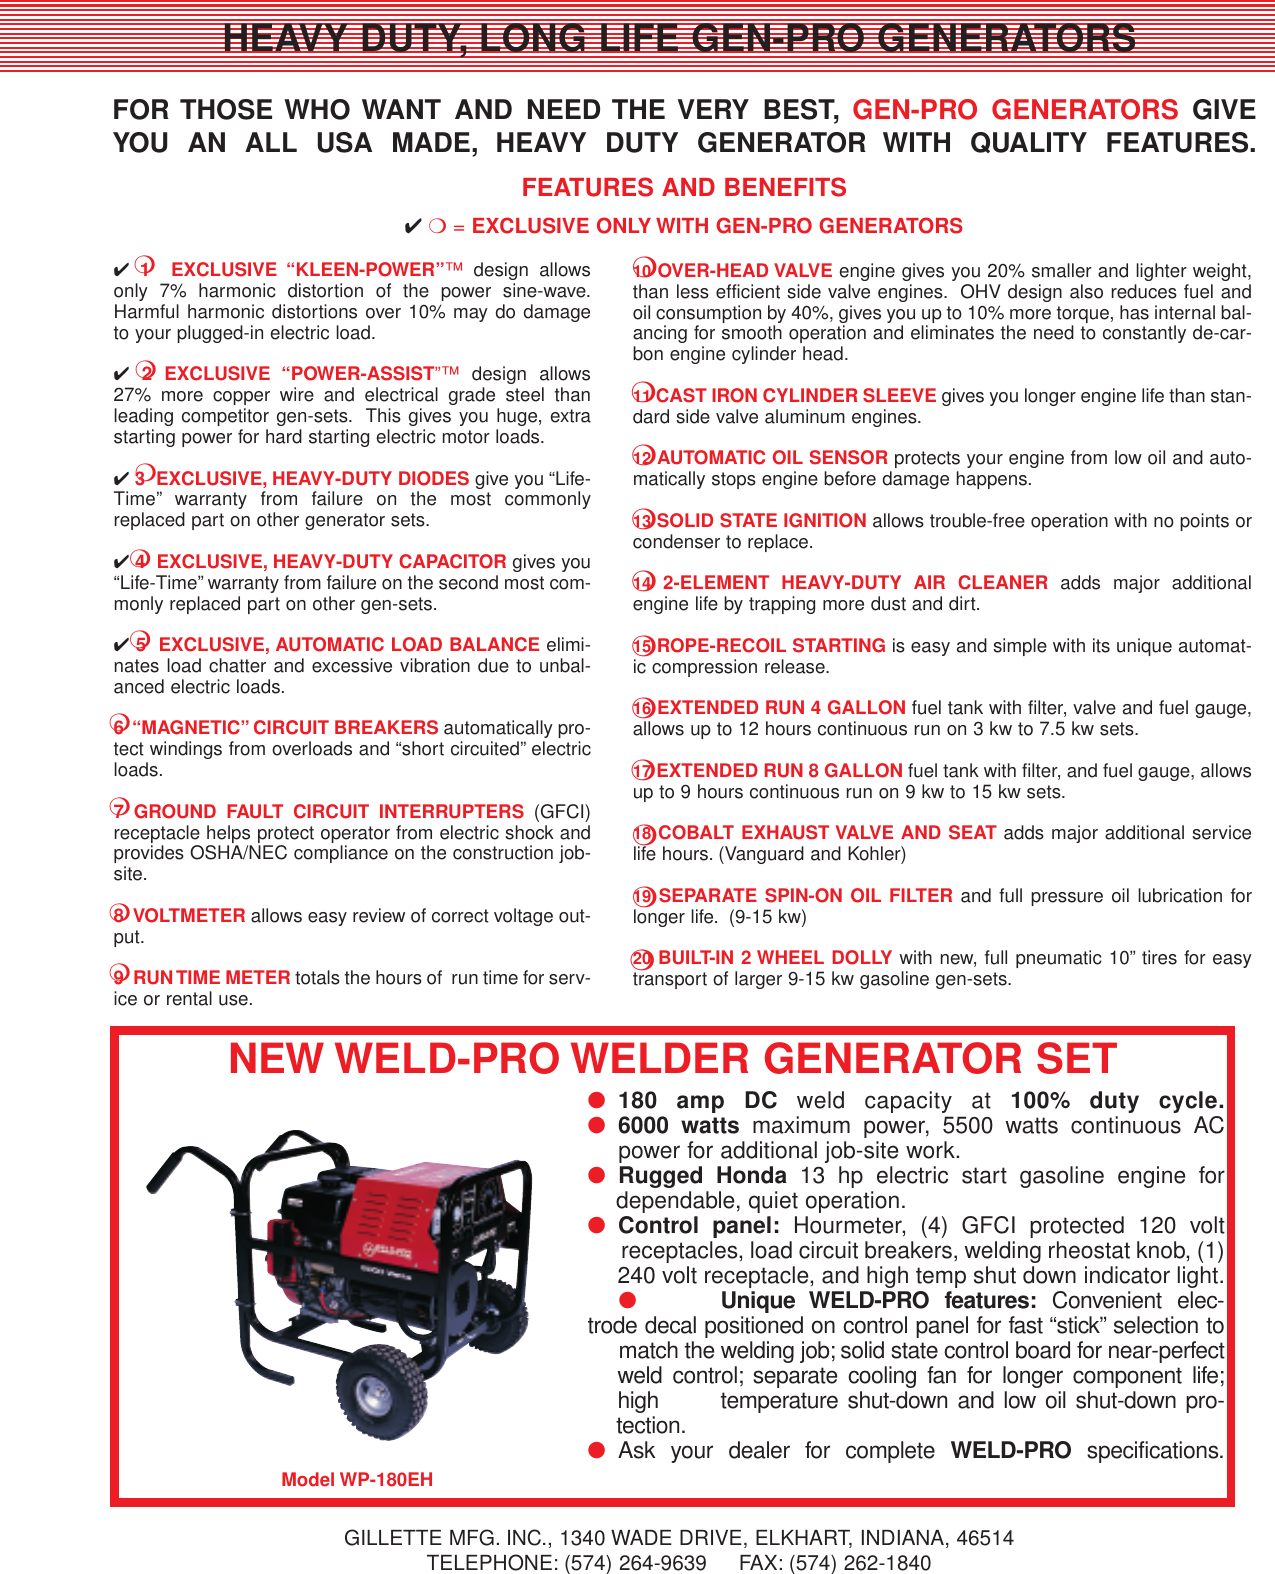 Page 5 of 6 - Gillette Gillette-Portable-Generators-Users-Manual- Gen-Pro 2  Gillette-portable-generators-users-manual